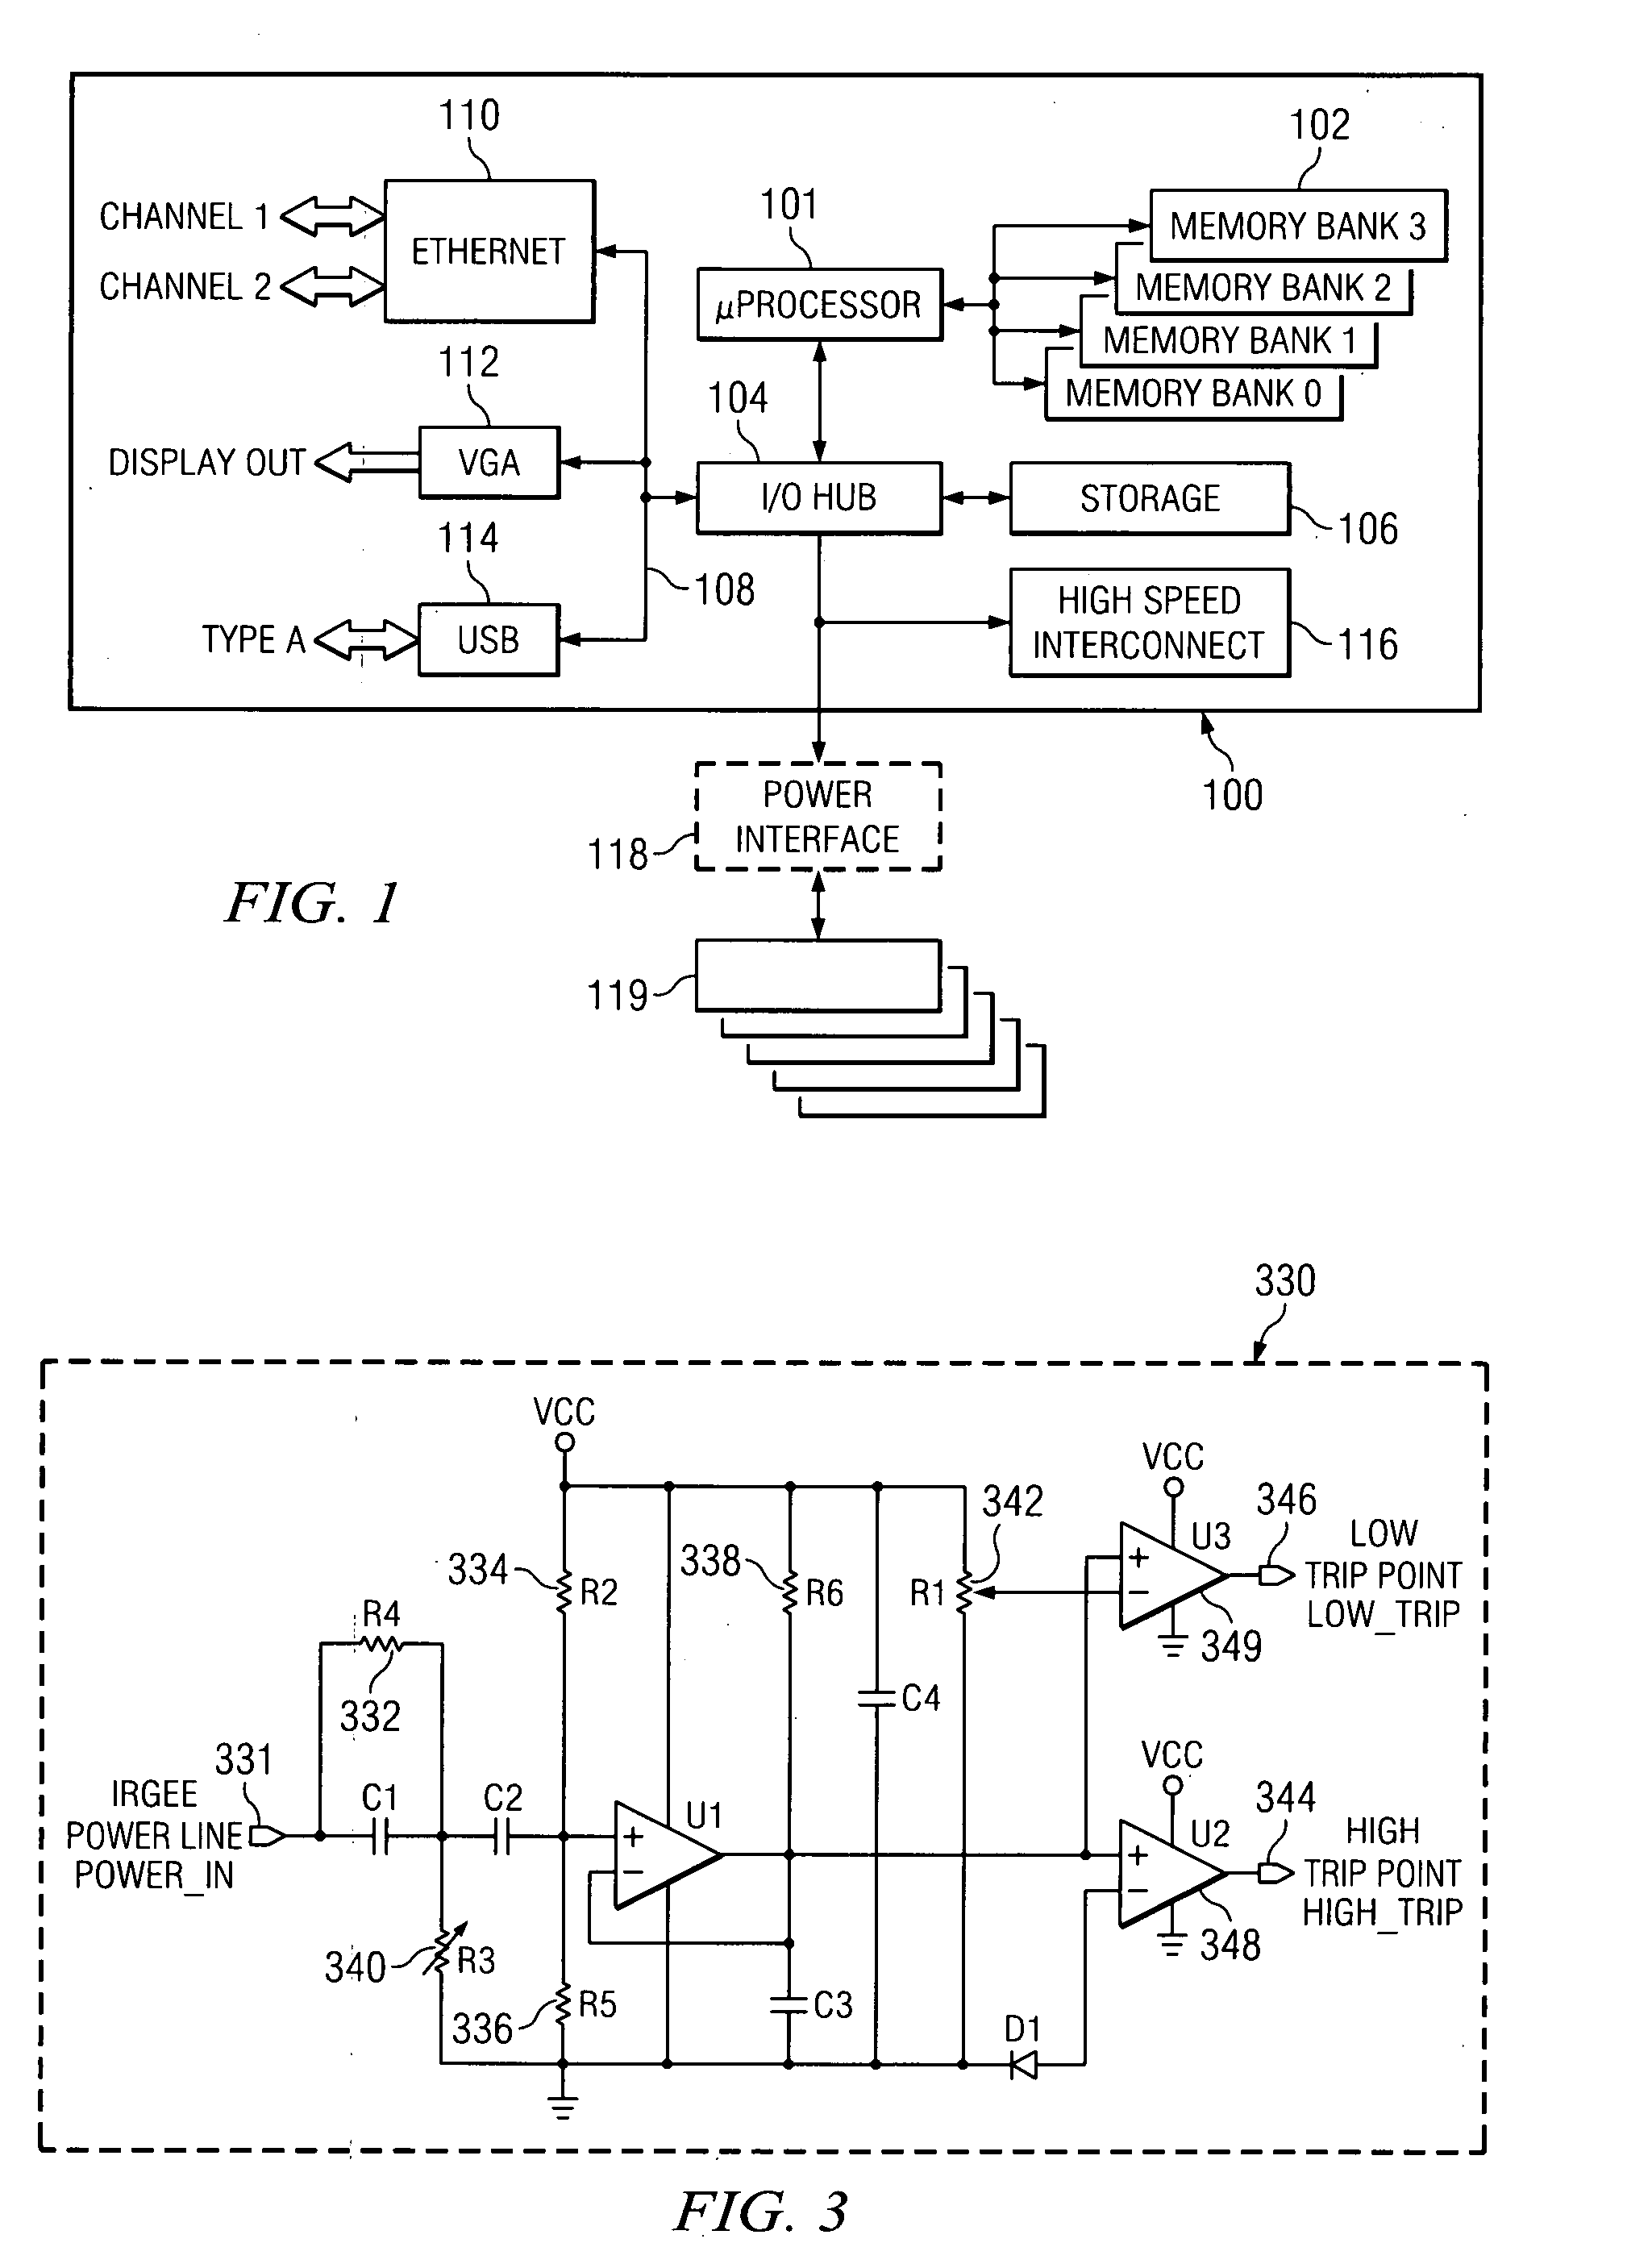 Self-monitoring and self-adjusting power consumption computer control system